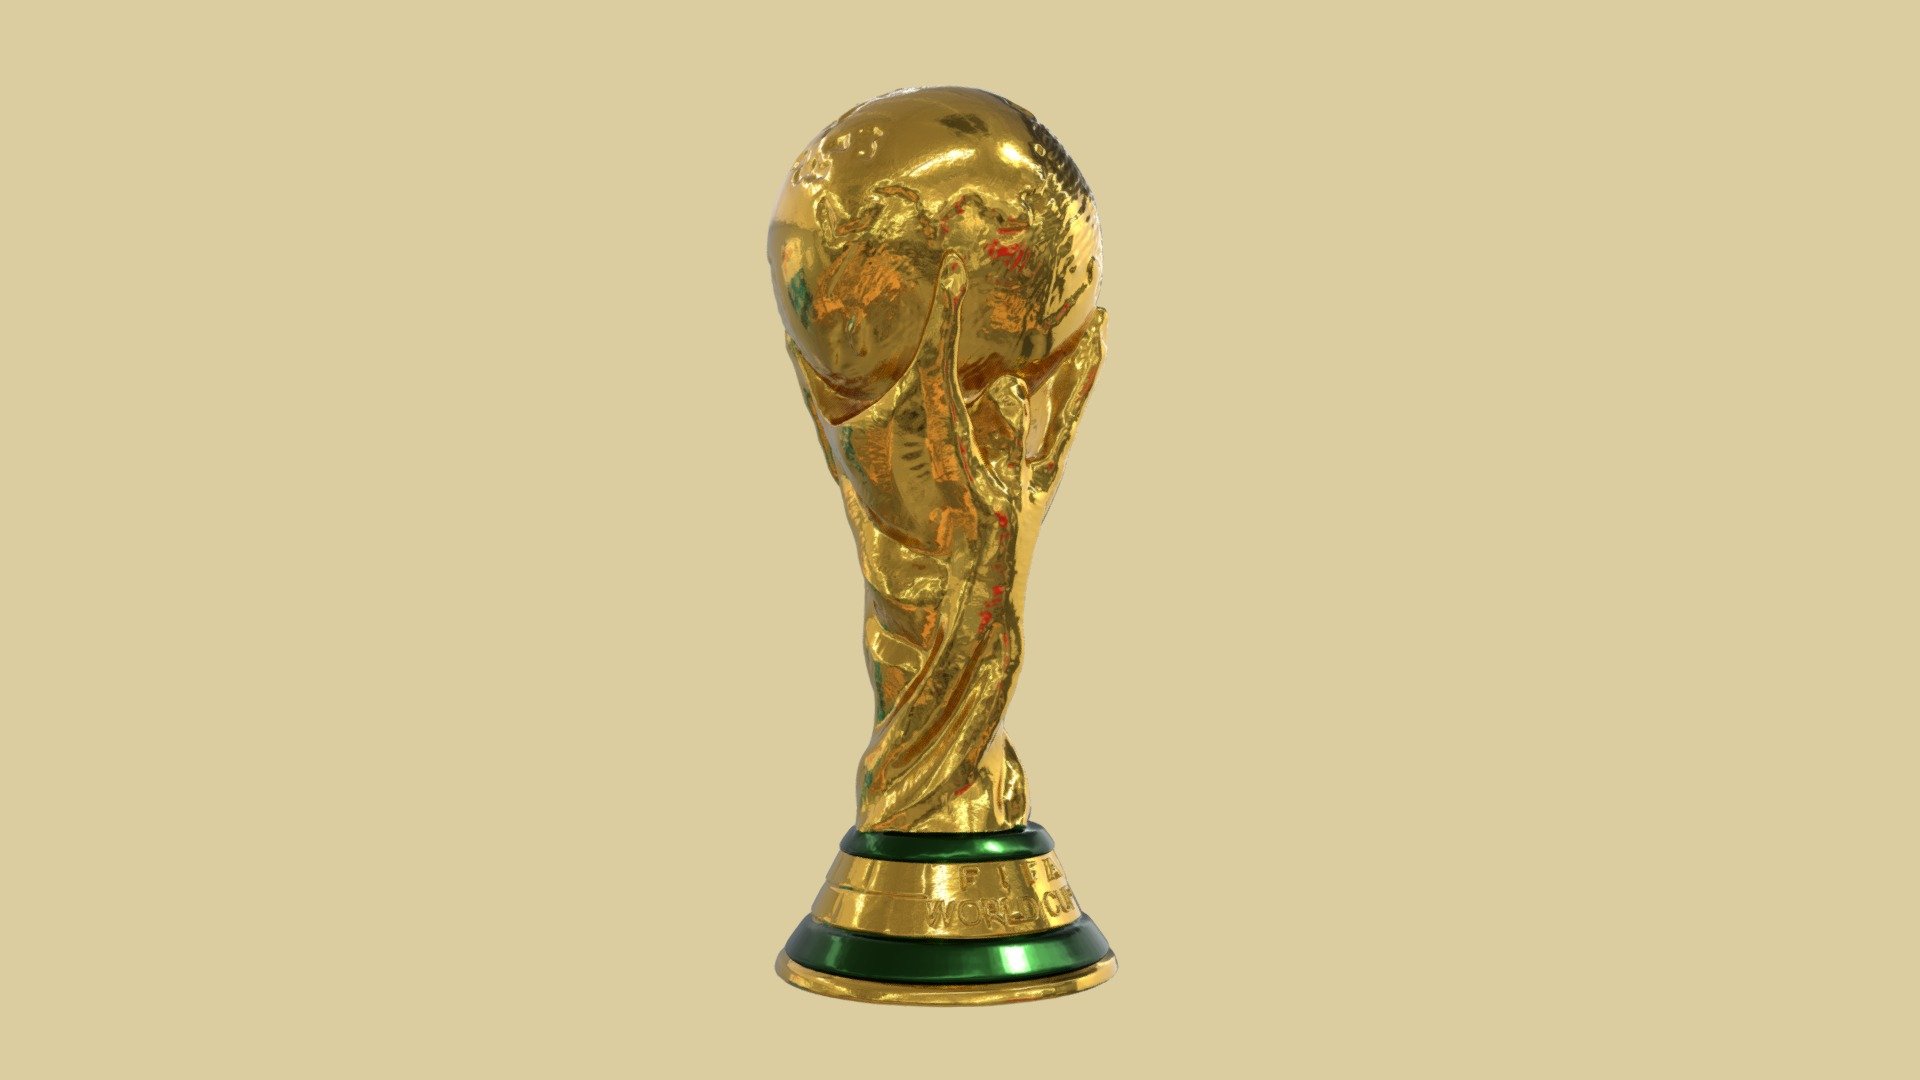 fifa world cup trophy